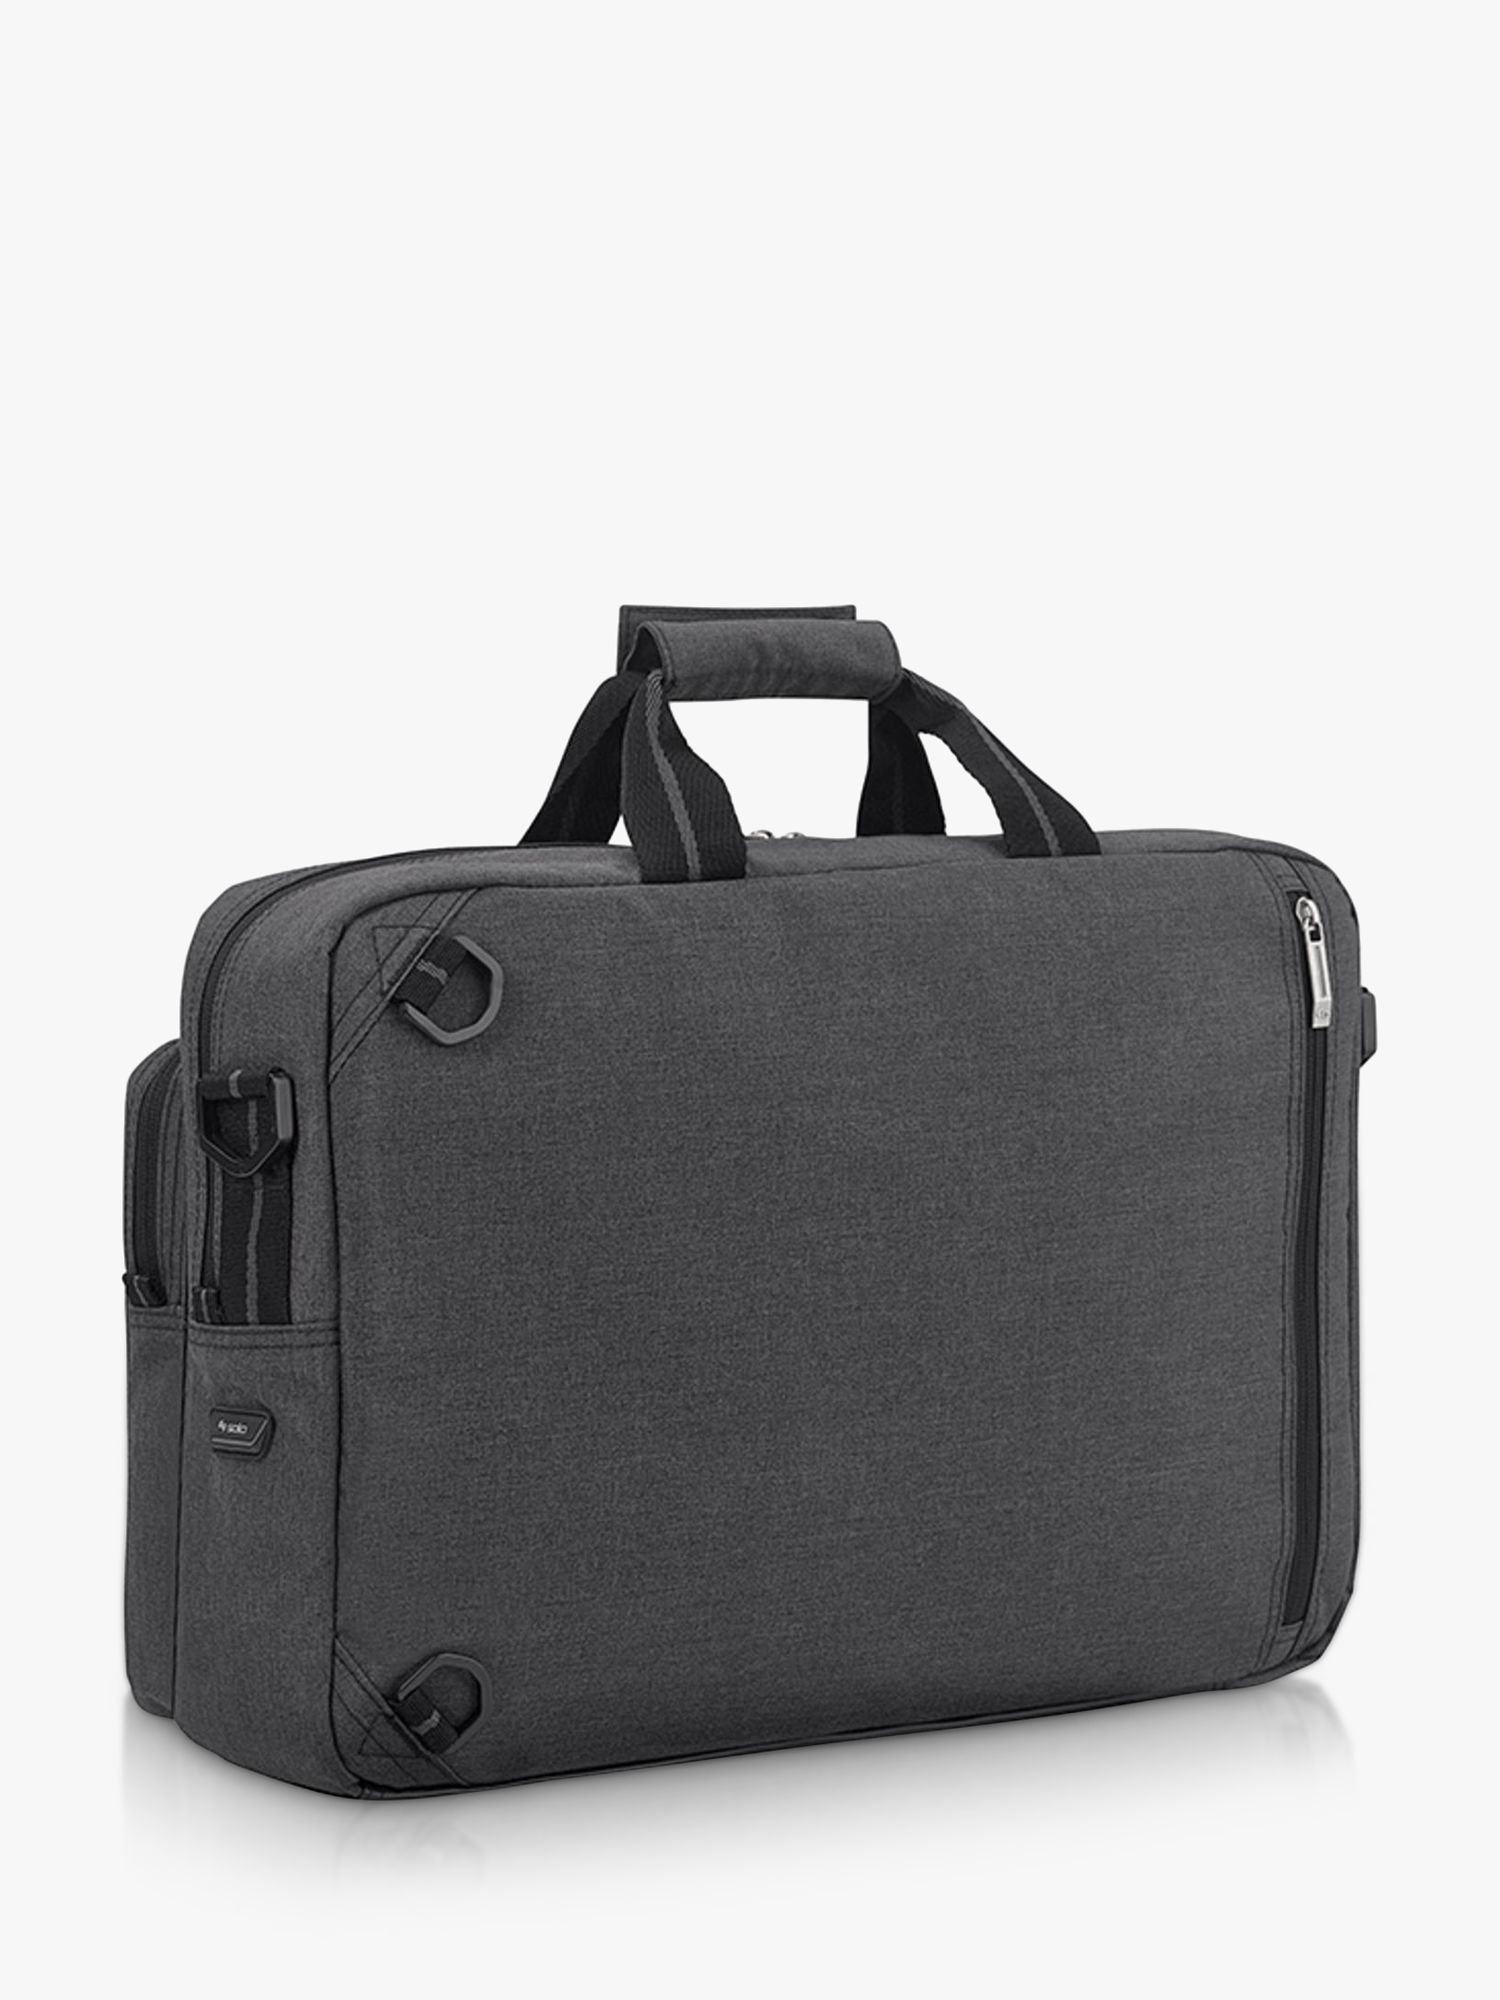 Solo NY Duane Convertible Briefcase Backpack, Grey